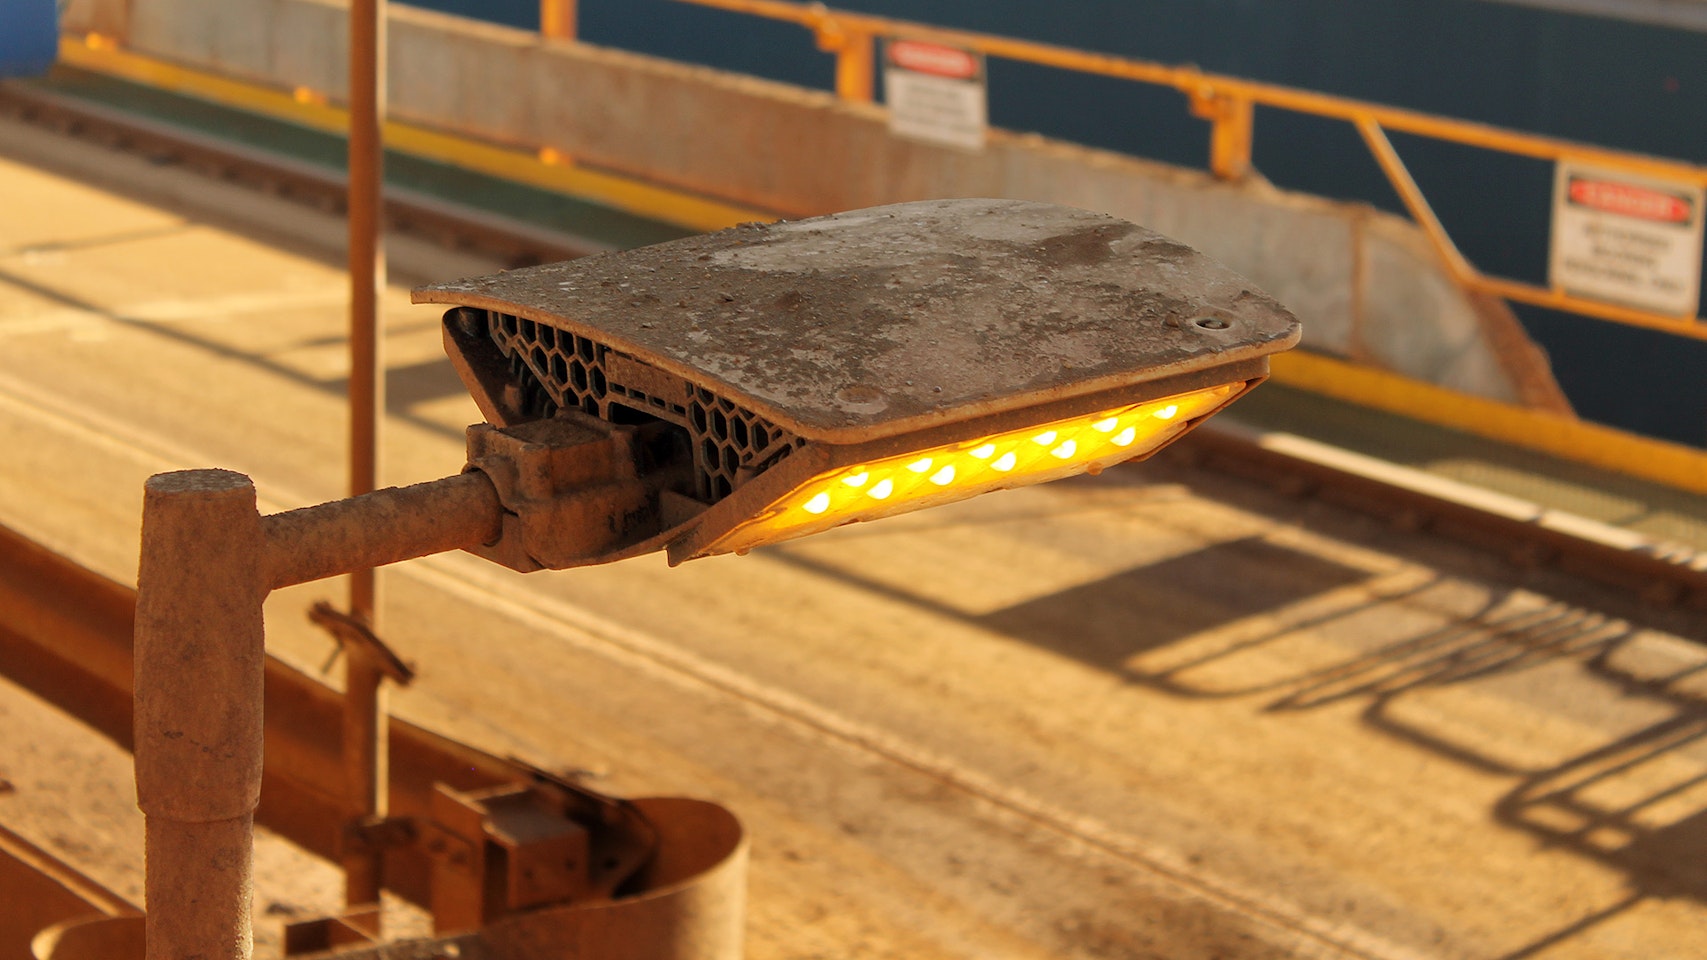 DLK LED Conveyor / Area Light in application, installed on a conveyor on an iron ore mine in bulk port, close up photo